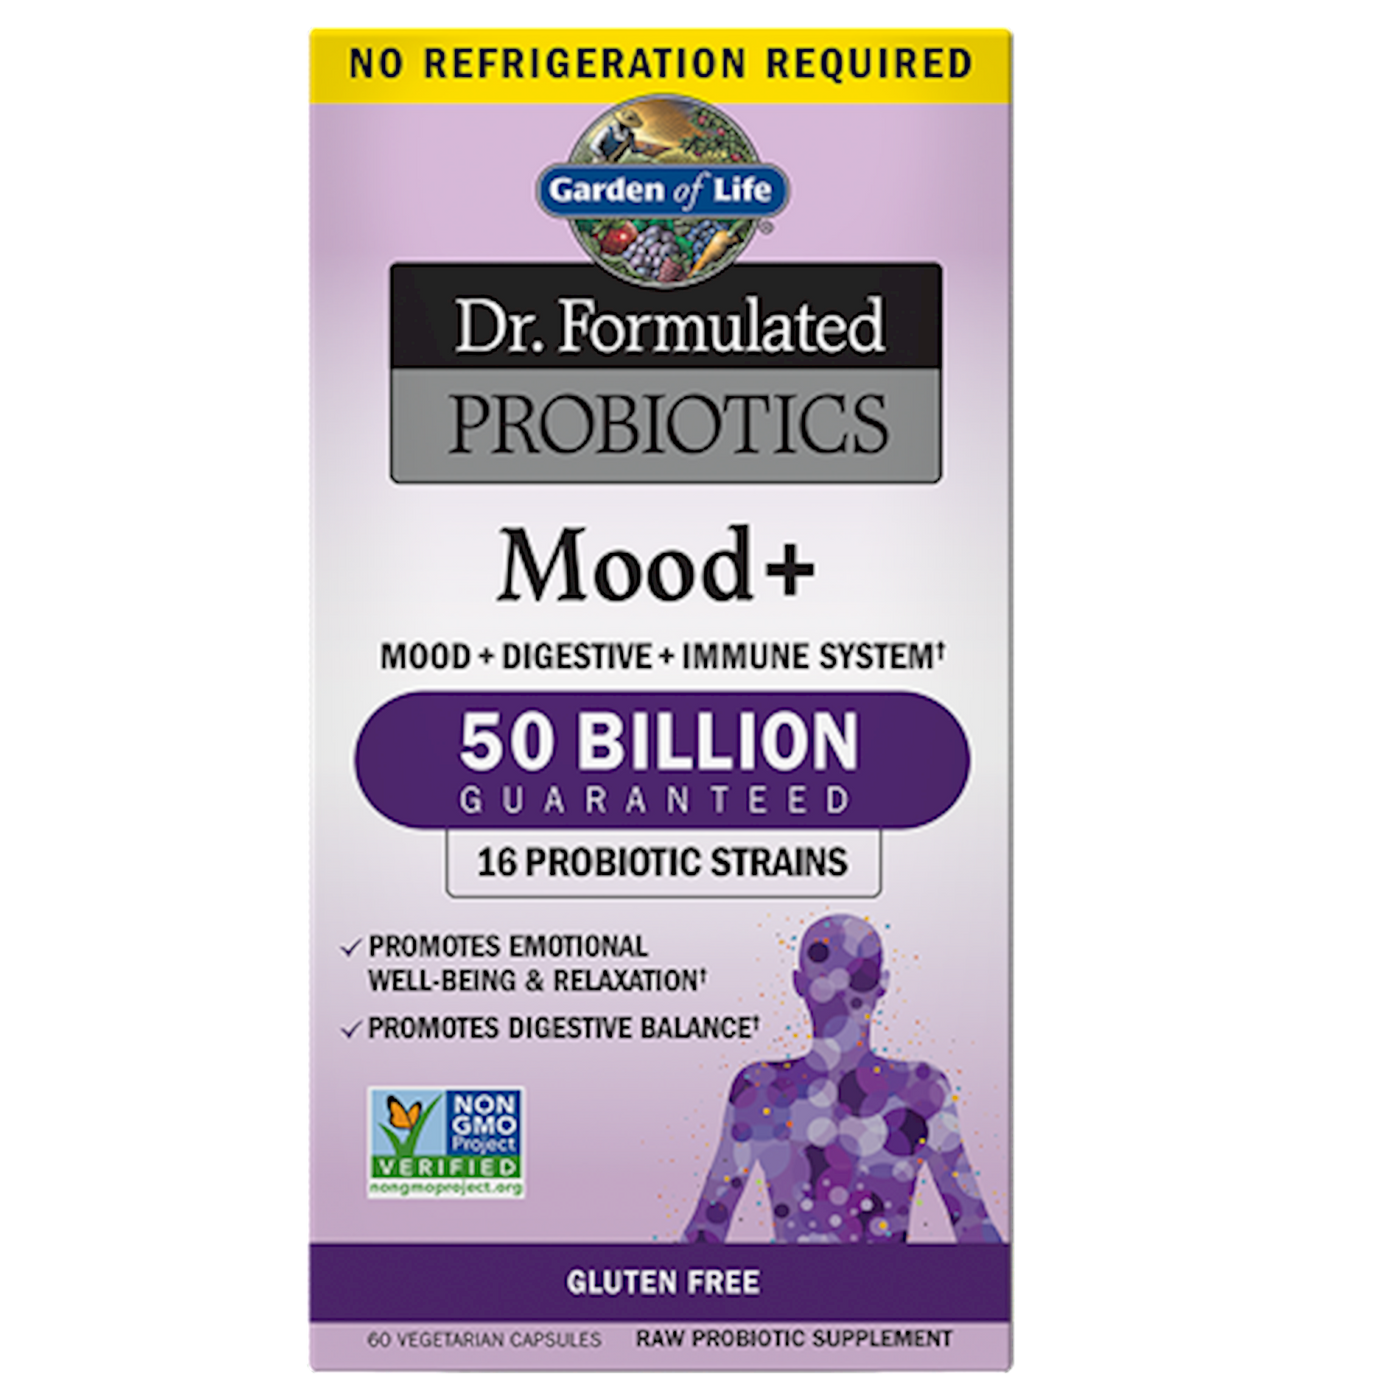 Dr. Formulated Probiotics Mood+  Curated Wellness